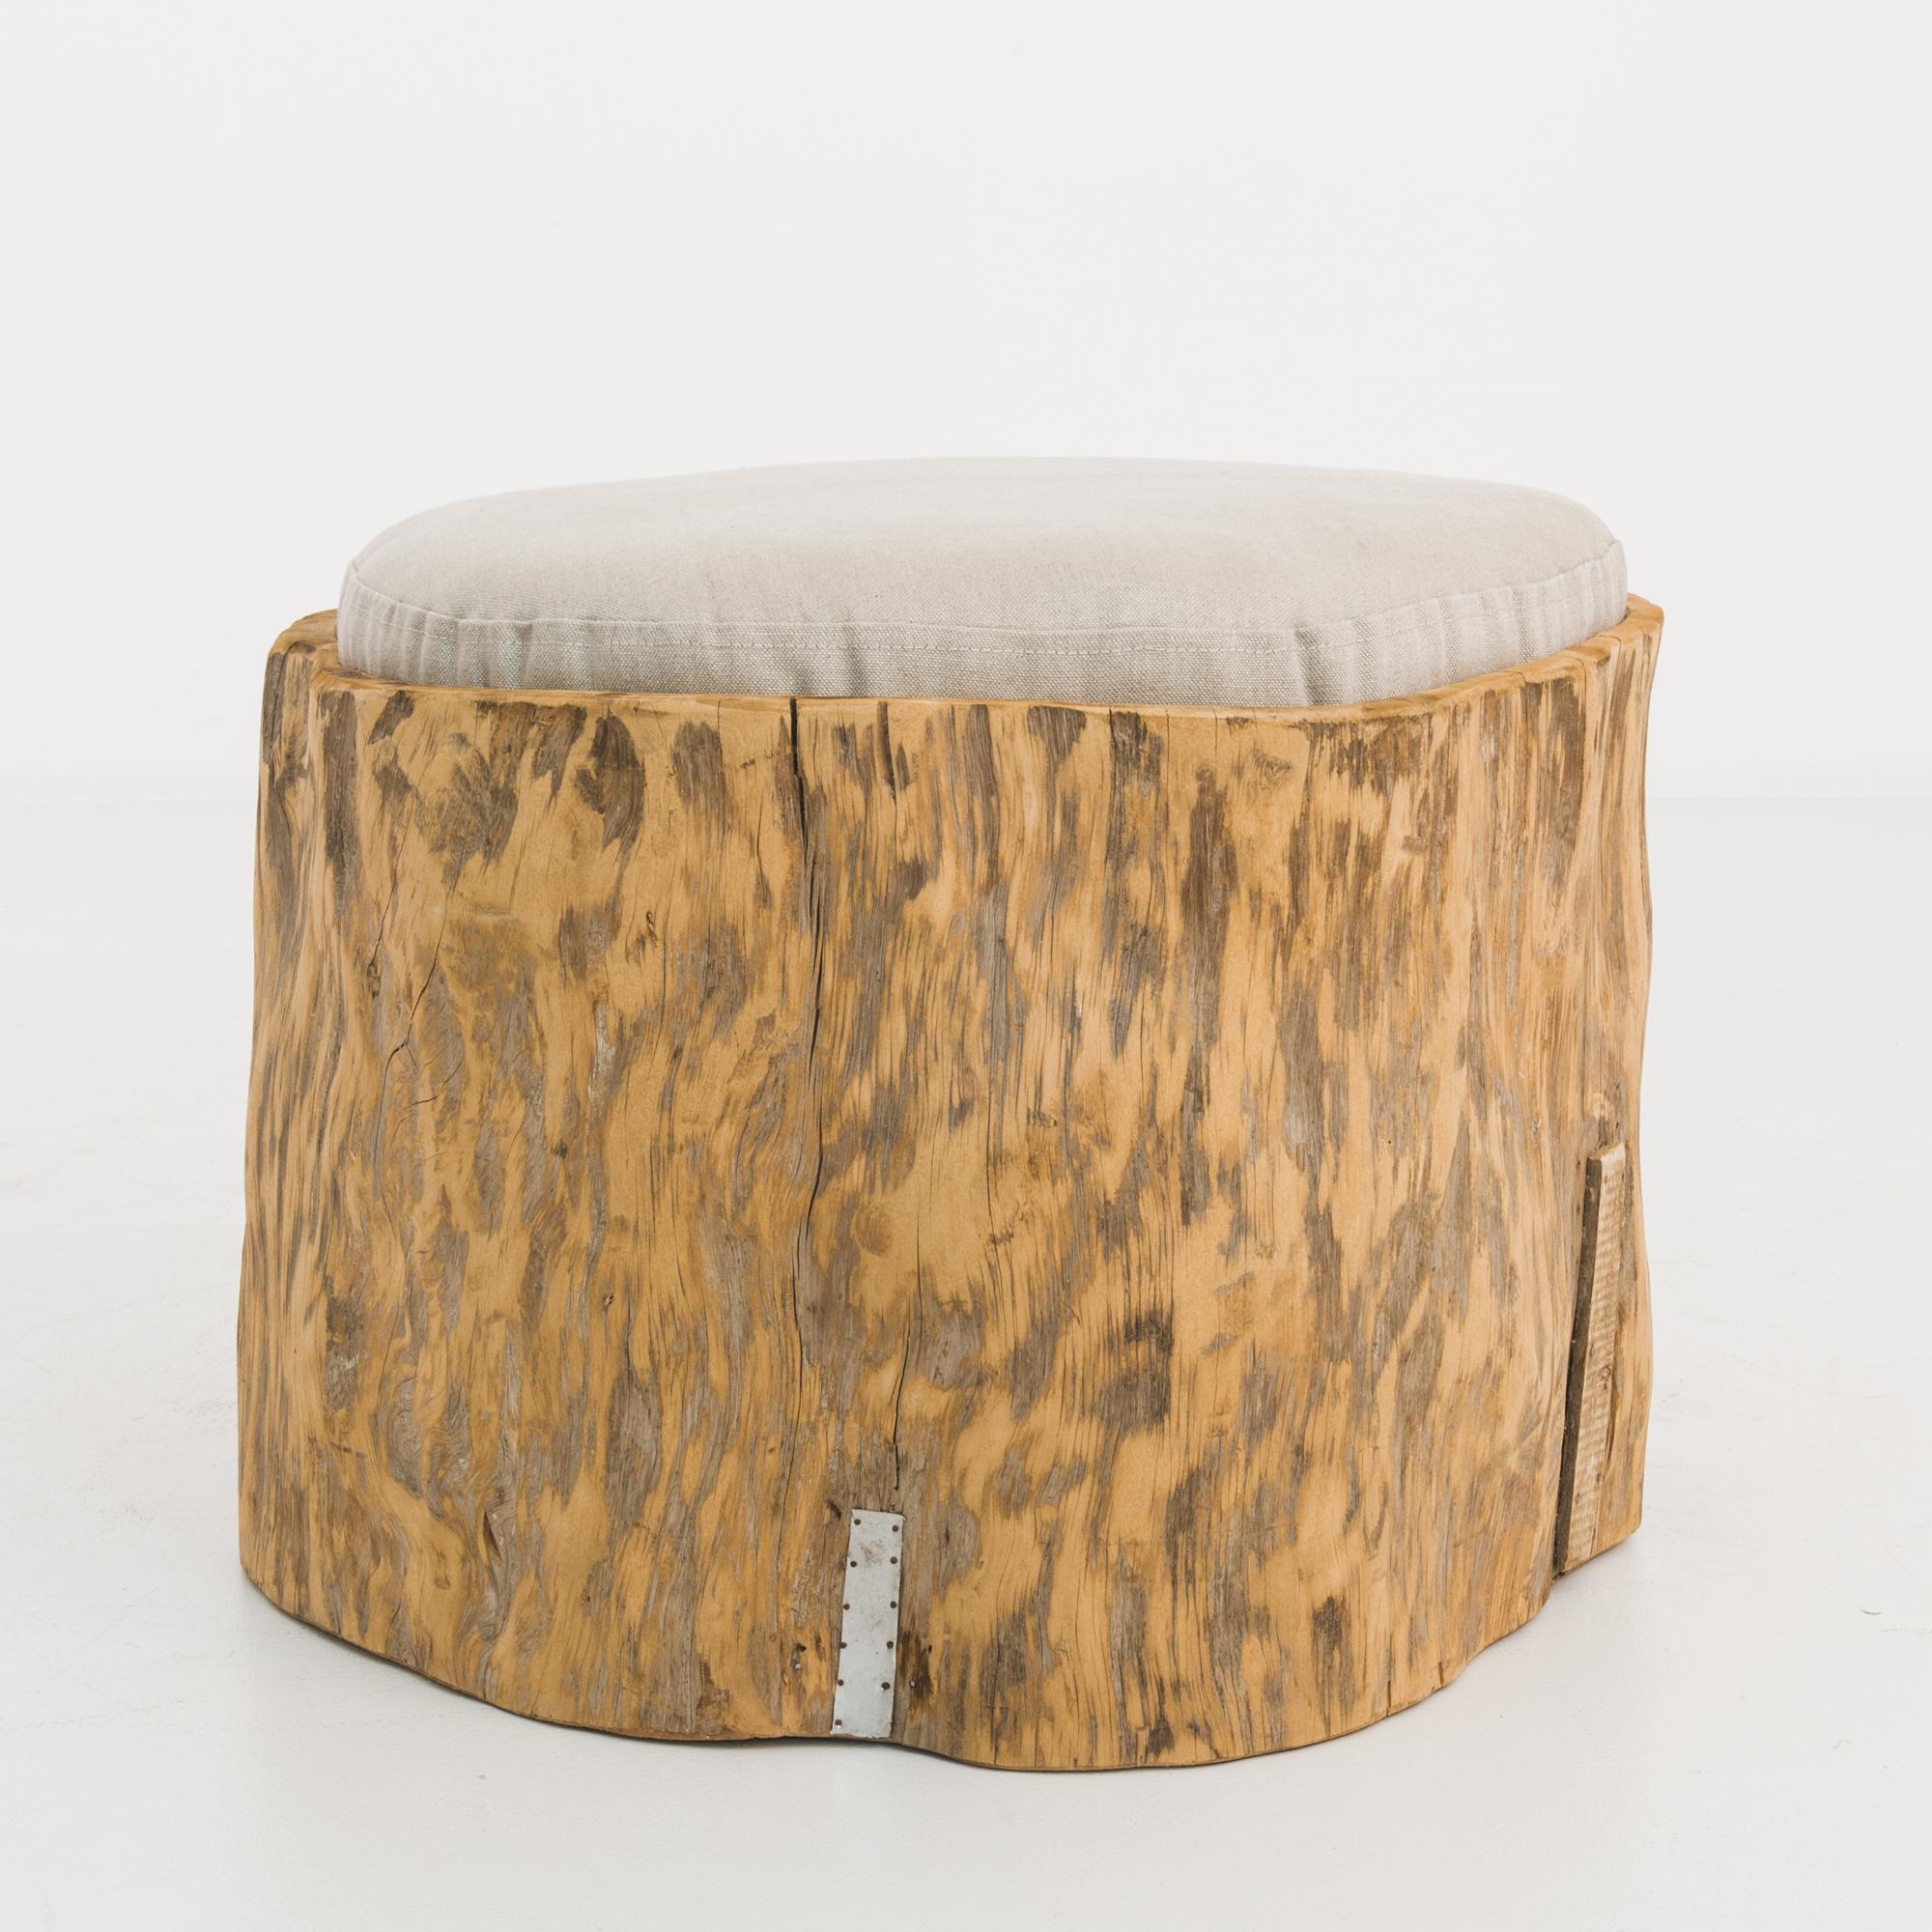 Rustic Central European Tree Trunk with Upholstered Seat